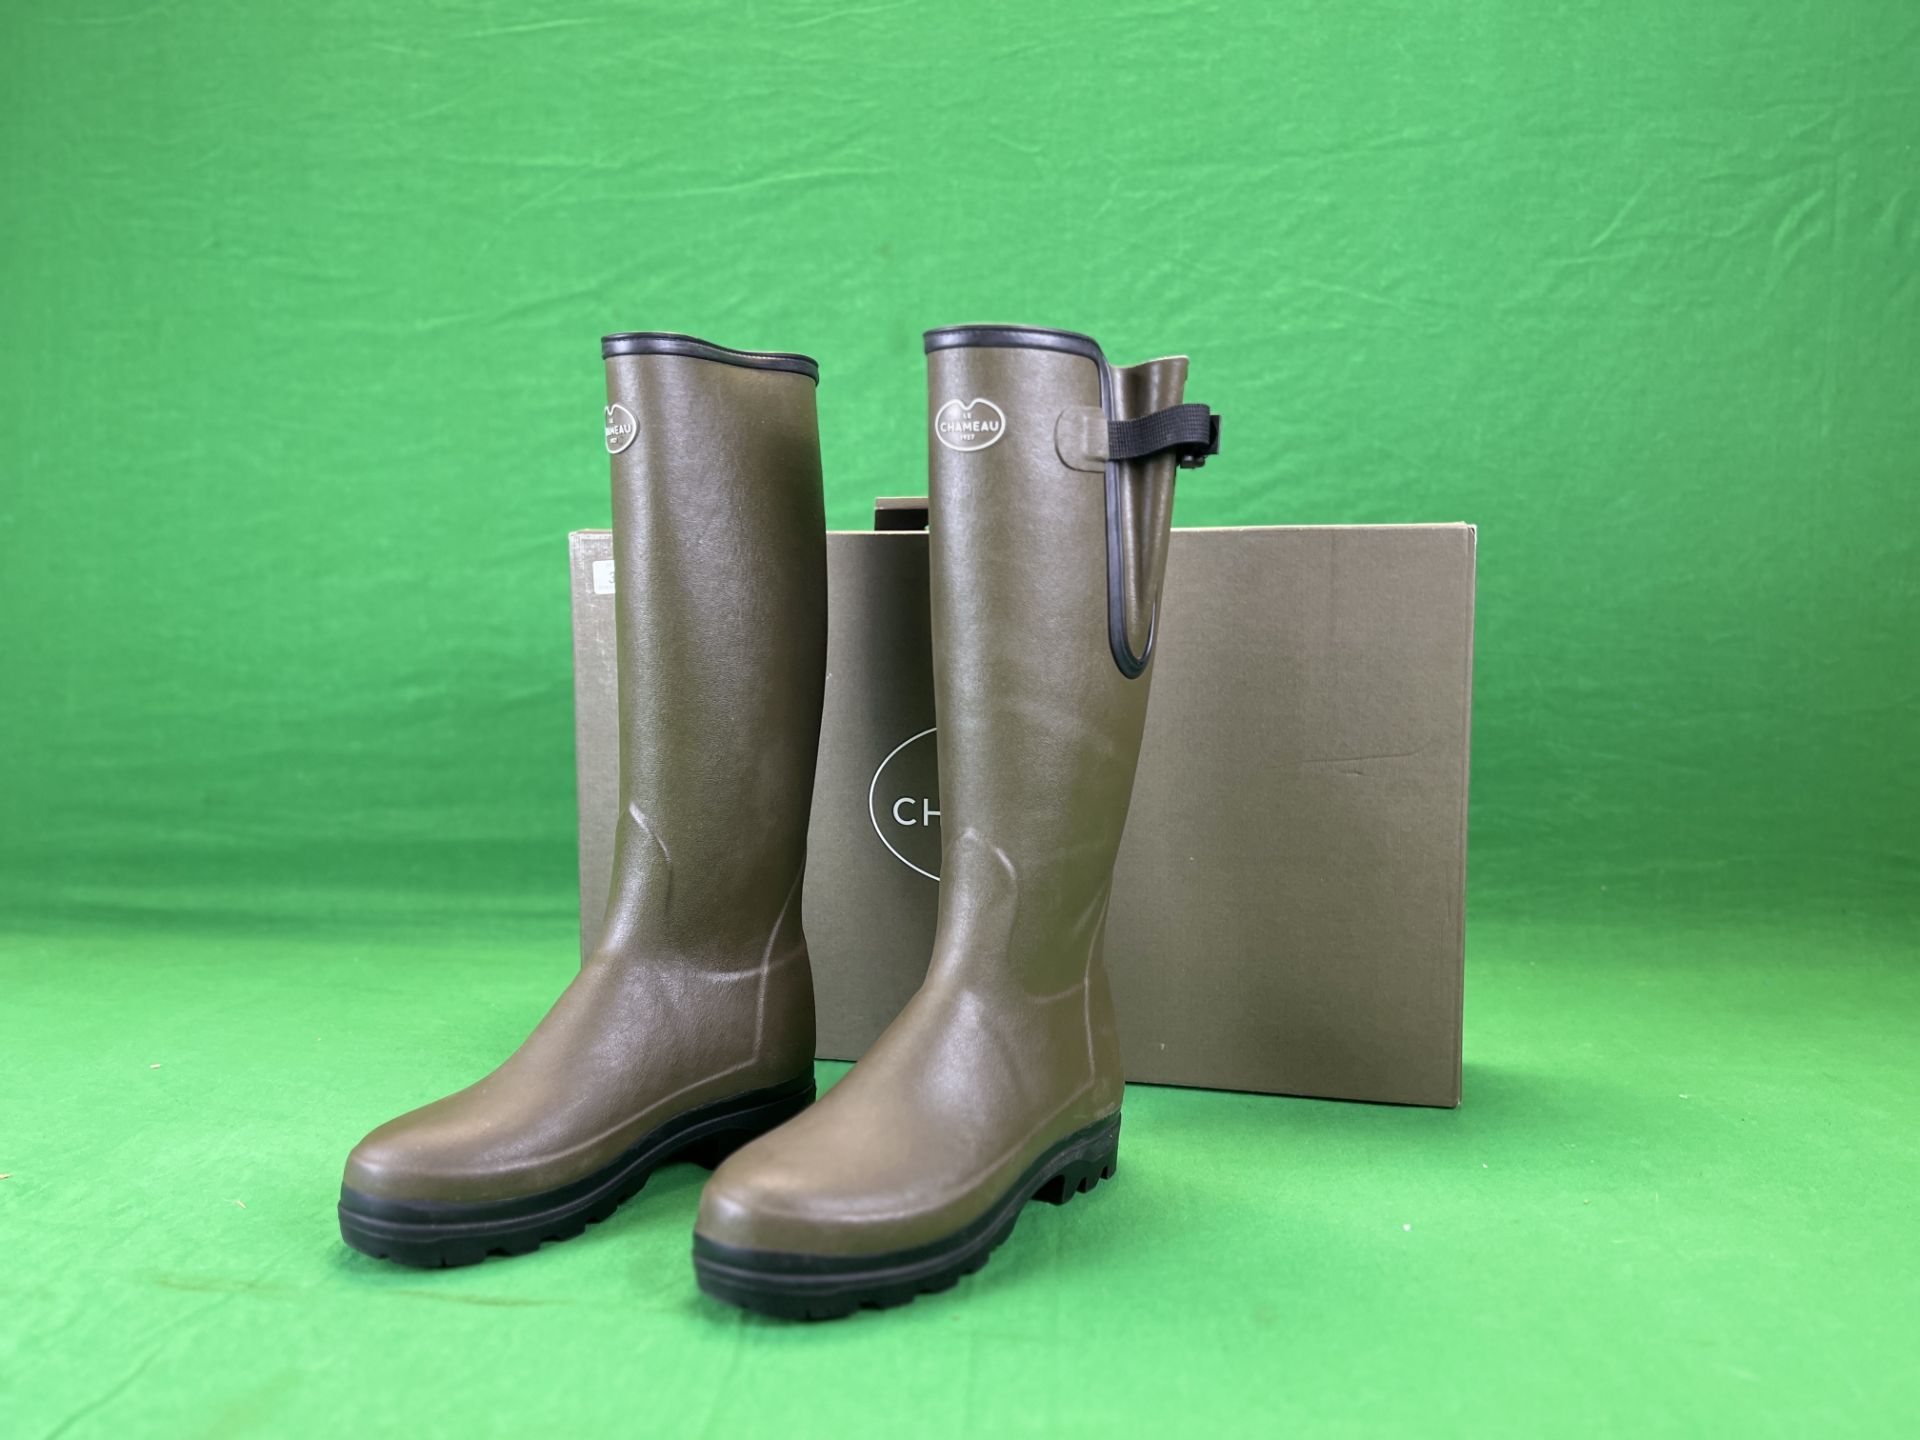 A PAIR OF AS NEW SIZE 40 LE CHAMEAU WELLIE BOOTS IN ORIGINAL LE CHAMEAU BOX